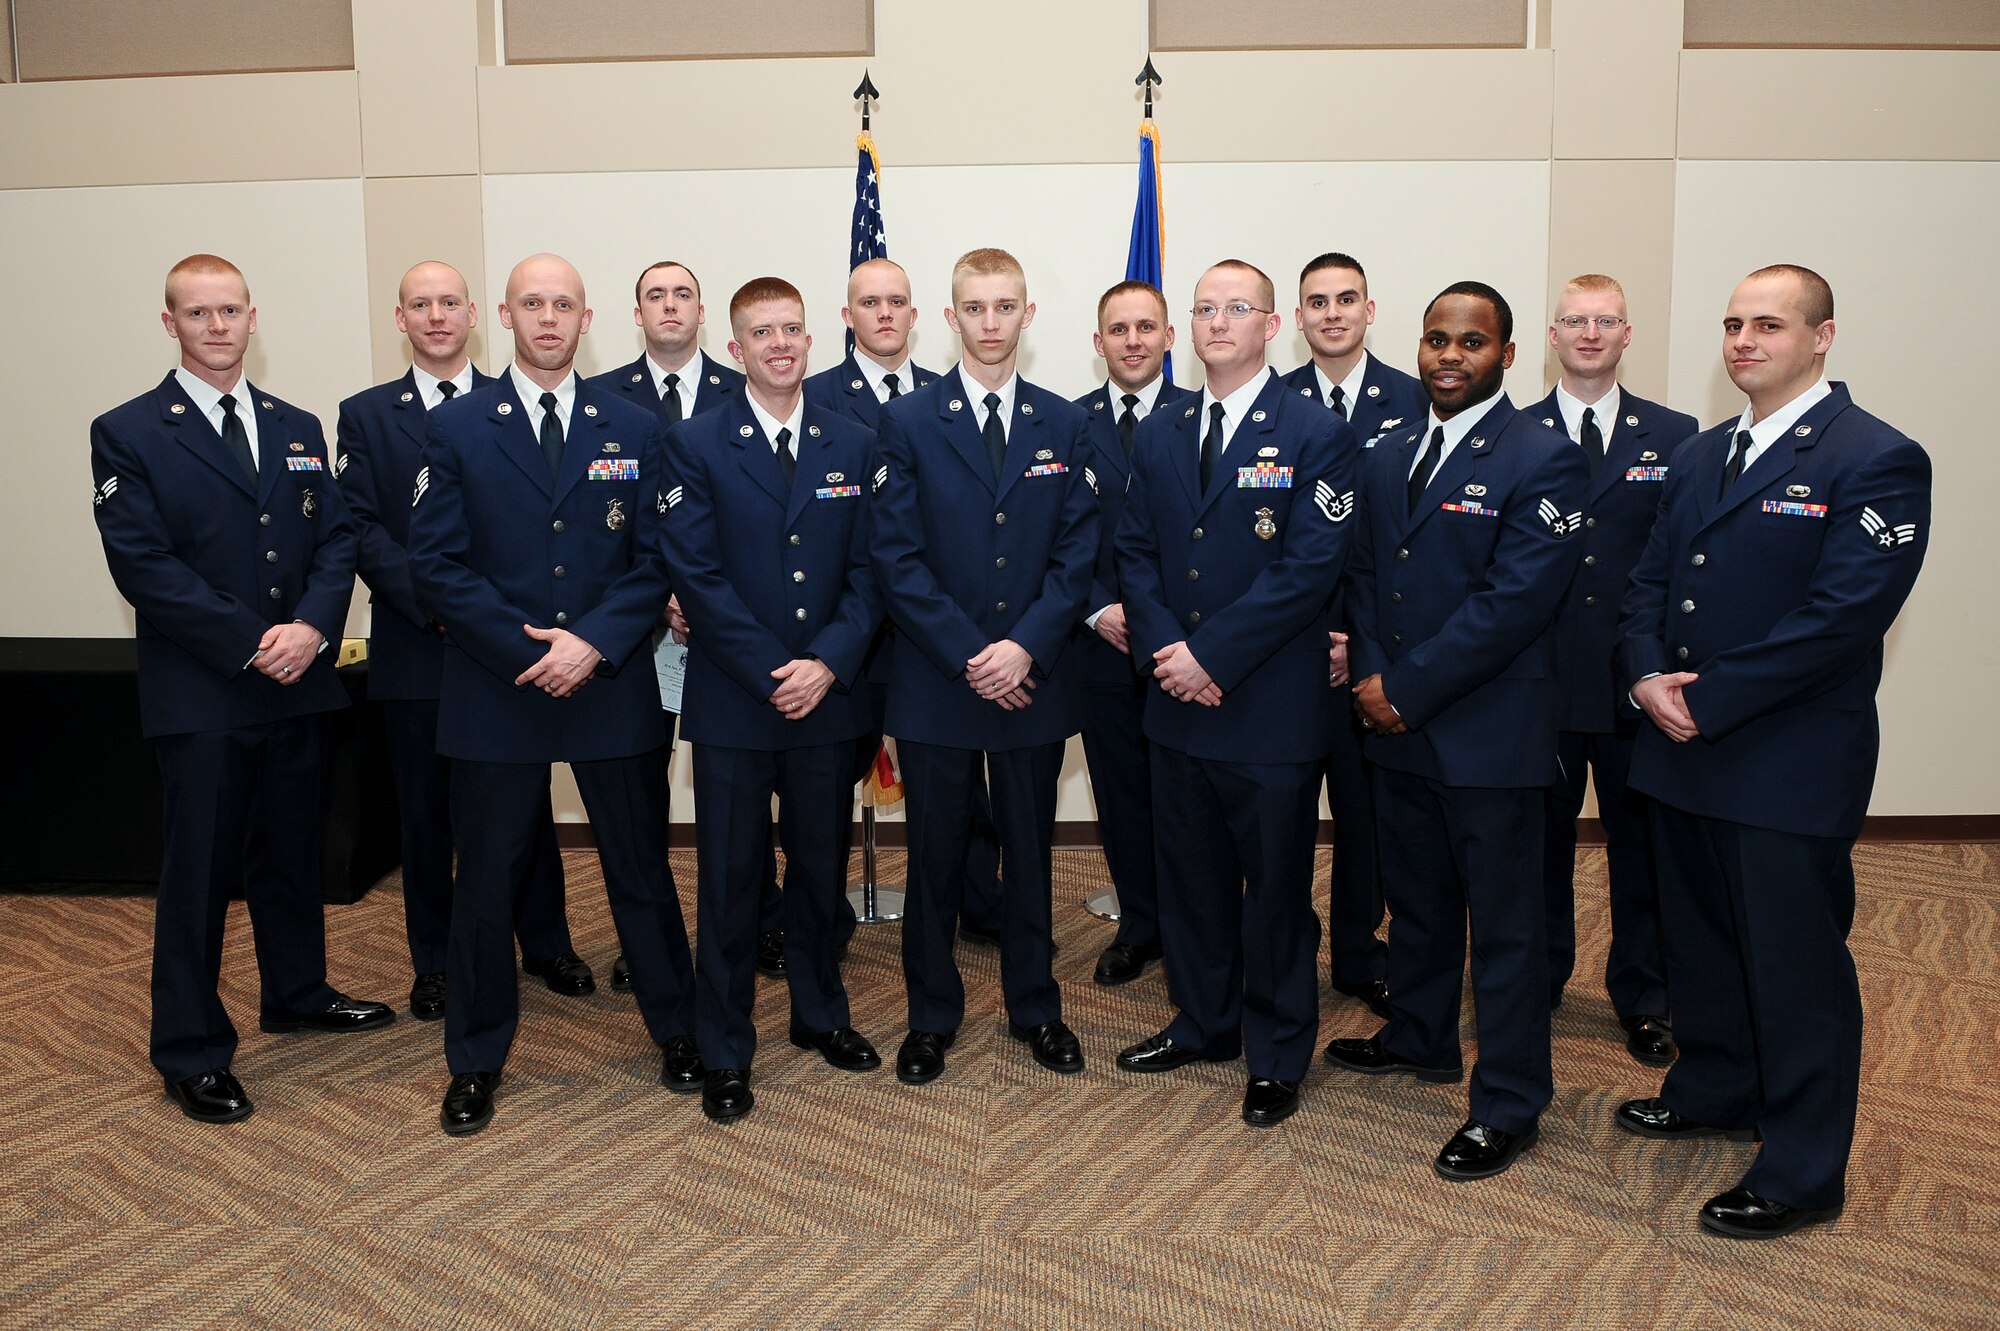 Buckley Airman Leadership School Class 14-B stand together after their graduation Feb. 13, 2014, at the Leadership Development Center on Buckley Air Force Base, Colo. This graduation represents an important part of the enlisted force professional military education, teaching valuable skills required for supervisors. (U.S. Air Force photo by Senior Airman Phillip Houk/Released)